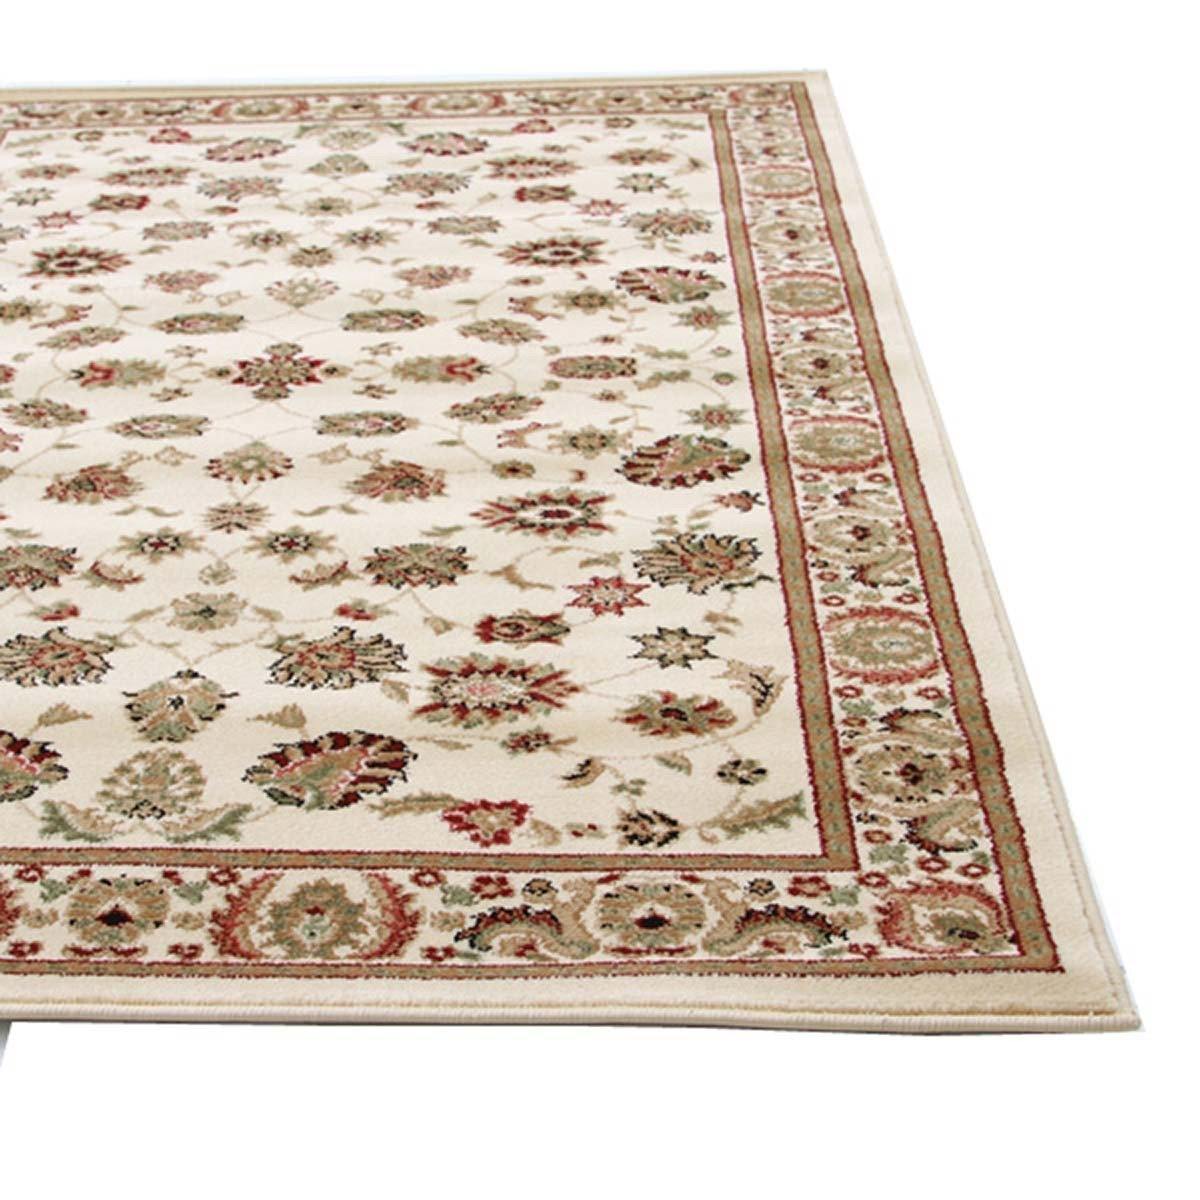 Istanbul Traditional Floral Pattern Runner Rug Ivory - Cozy Rugs Australia